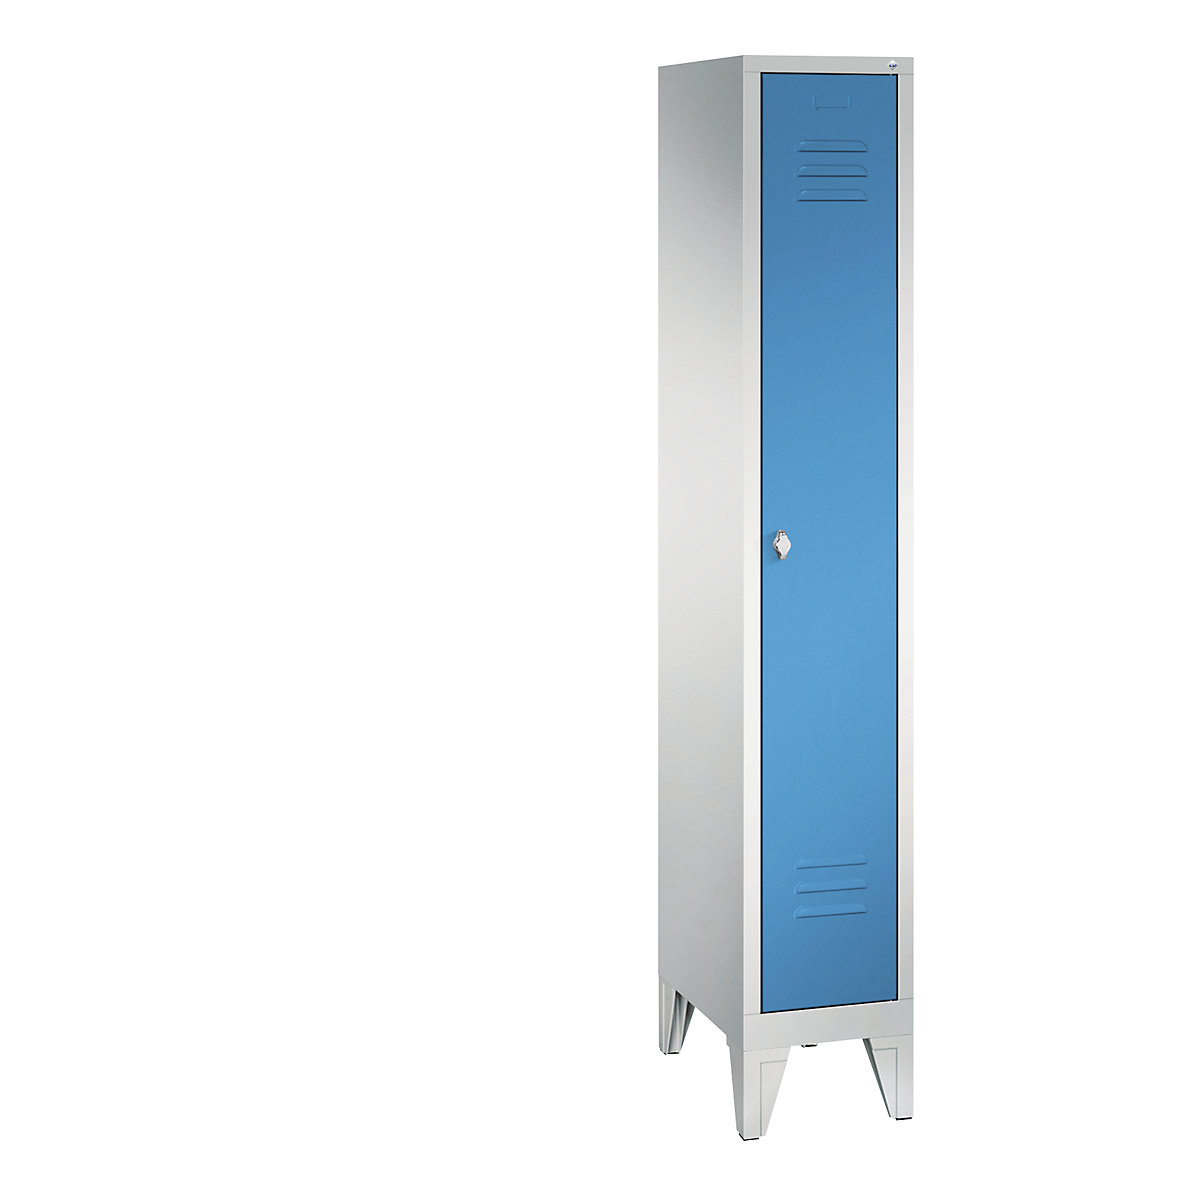 CLASSIC cloakroom locker with feet – C+P, 1 compartment, compartment width 300 mm, light grey / light blue-5